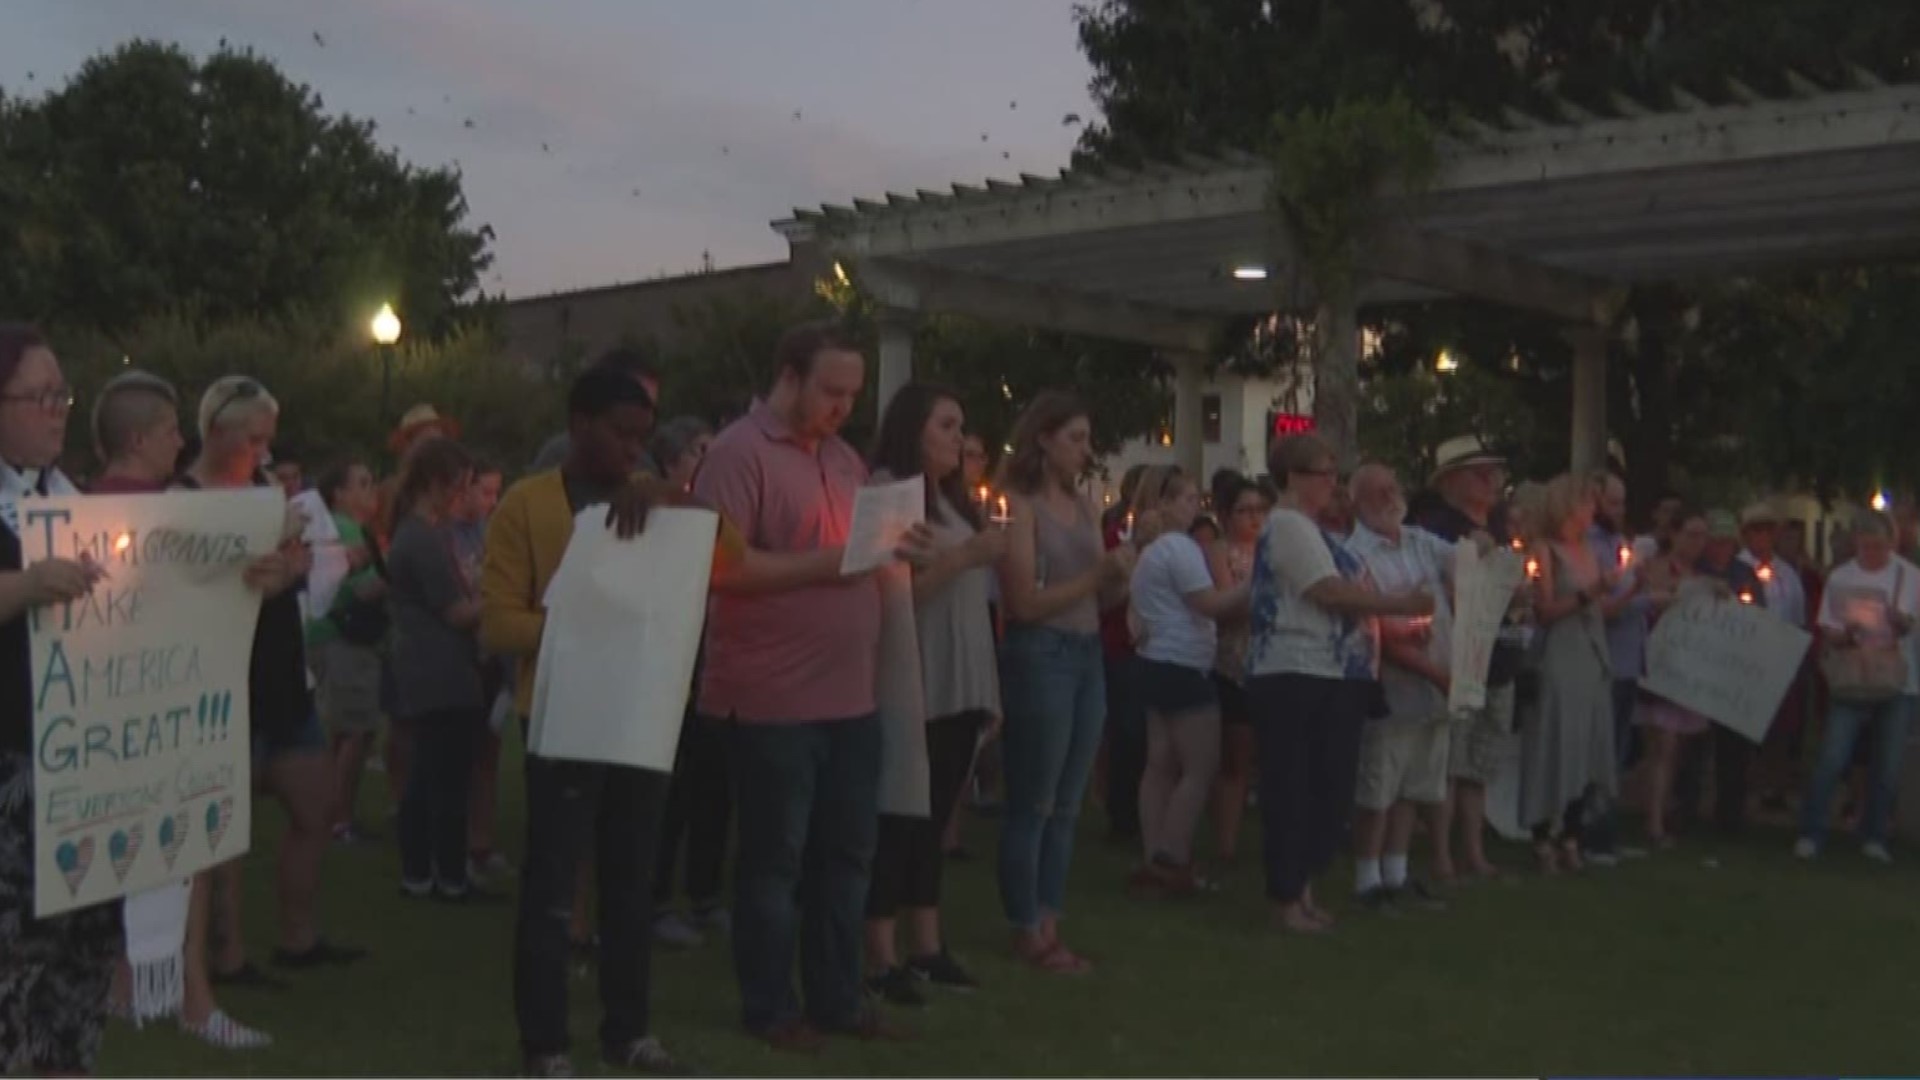 About 100 people gathered to show that Waco stands with fellow Texans.